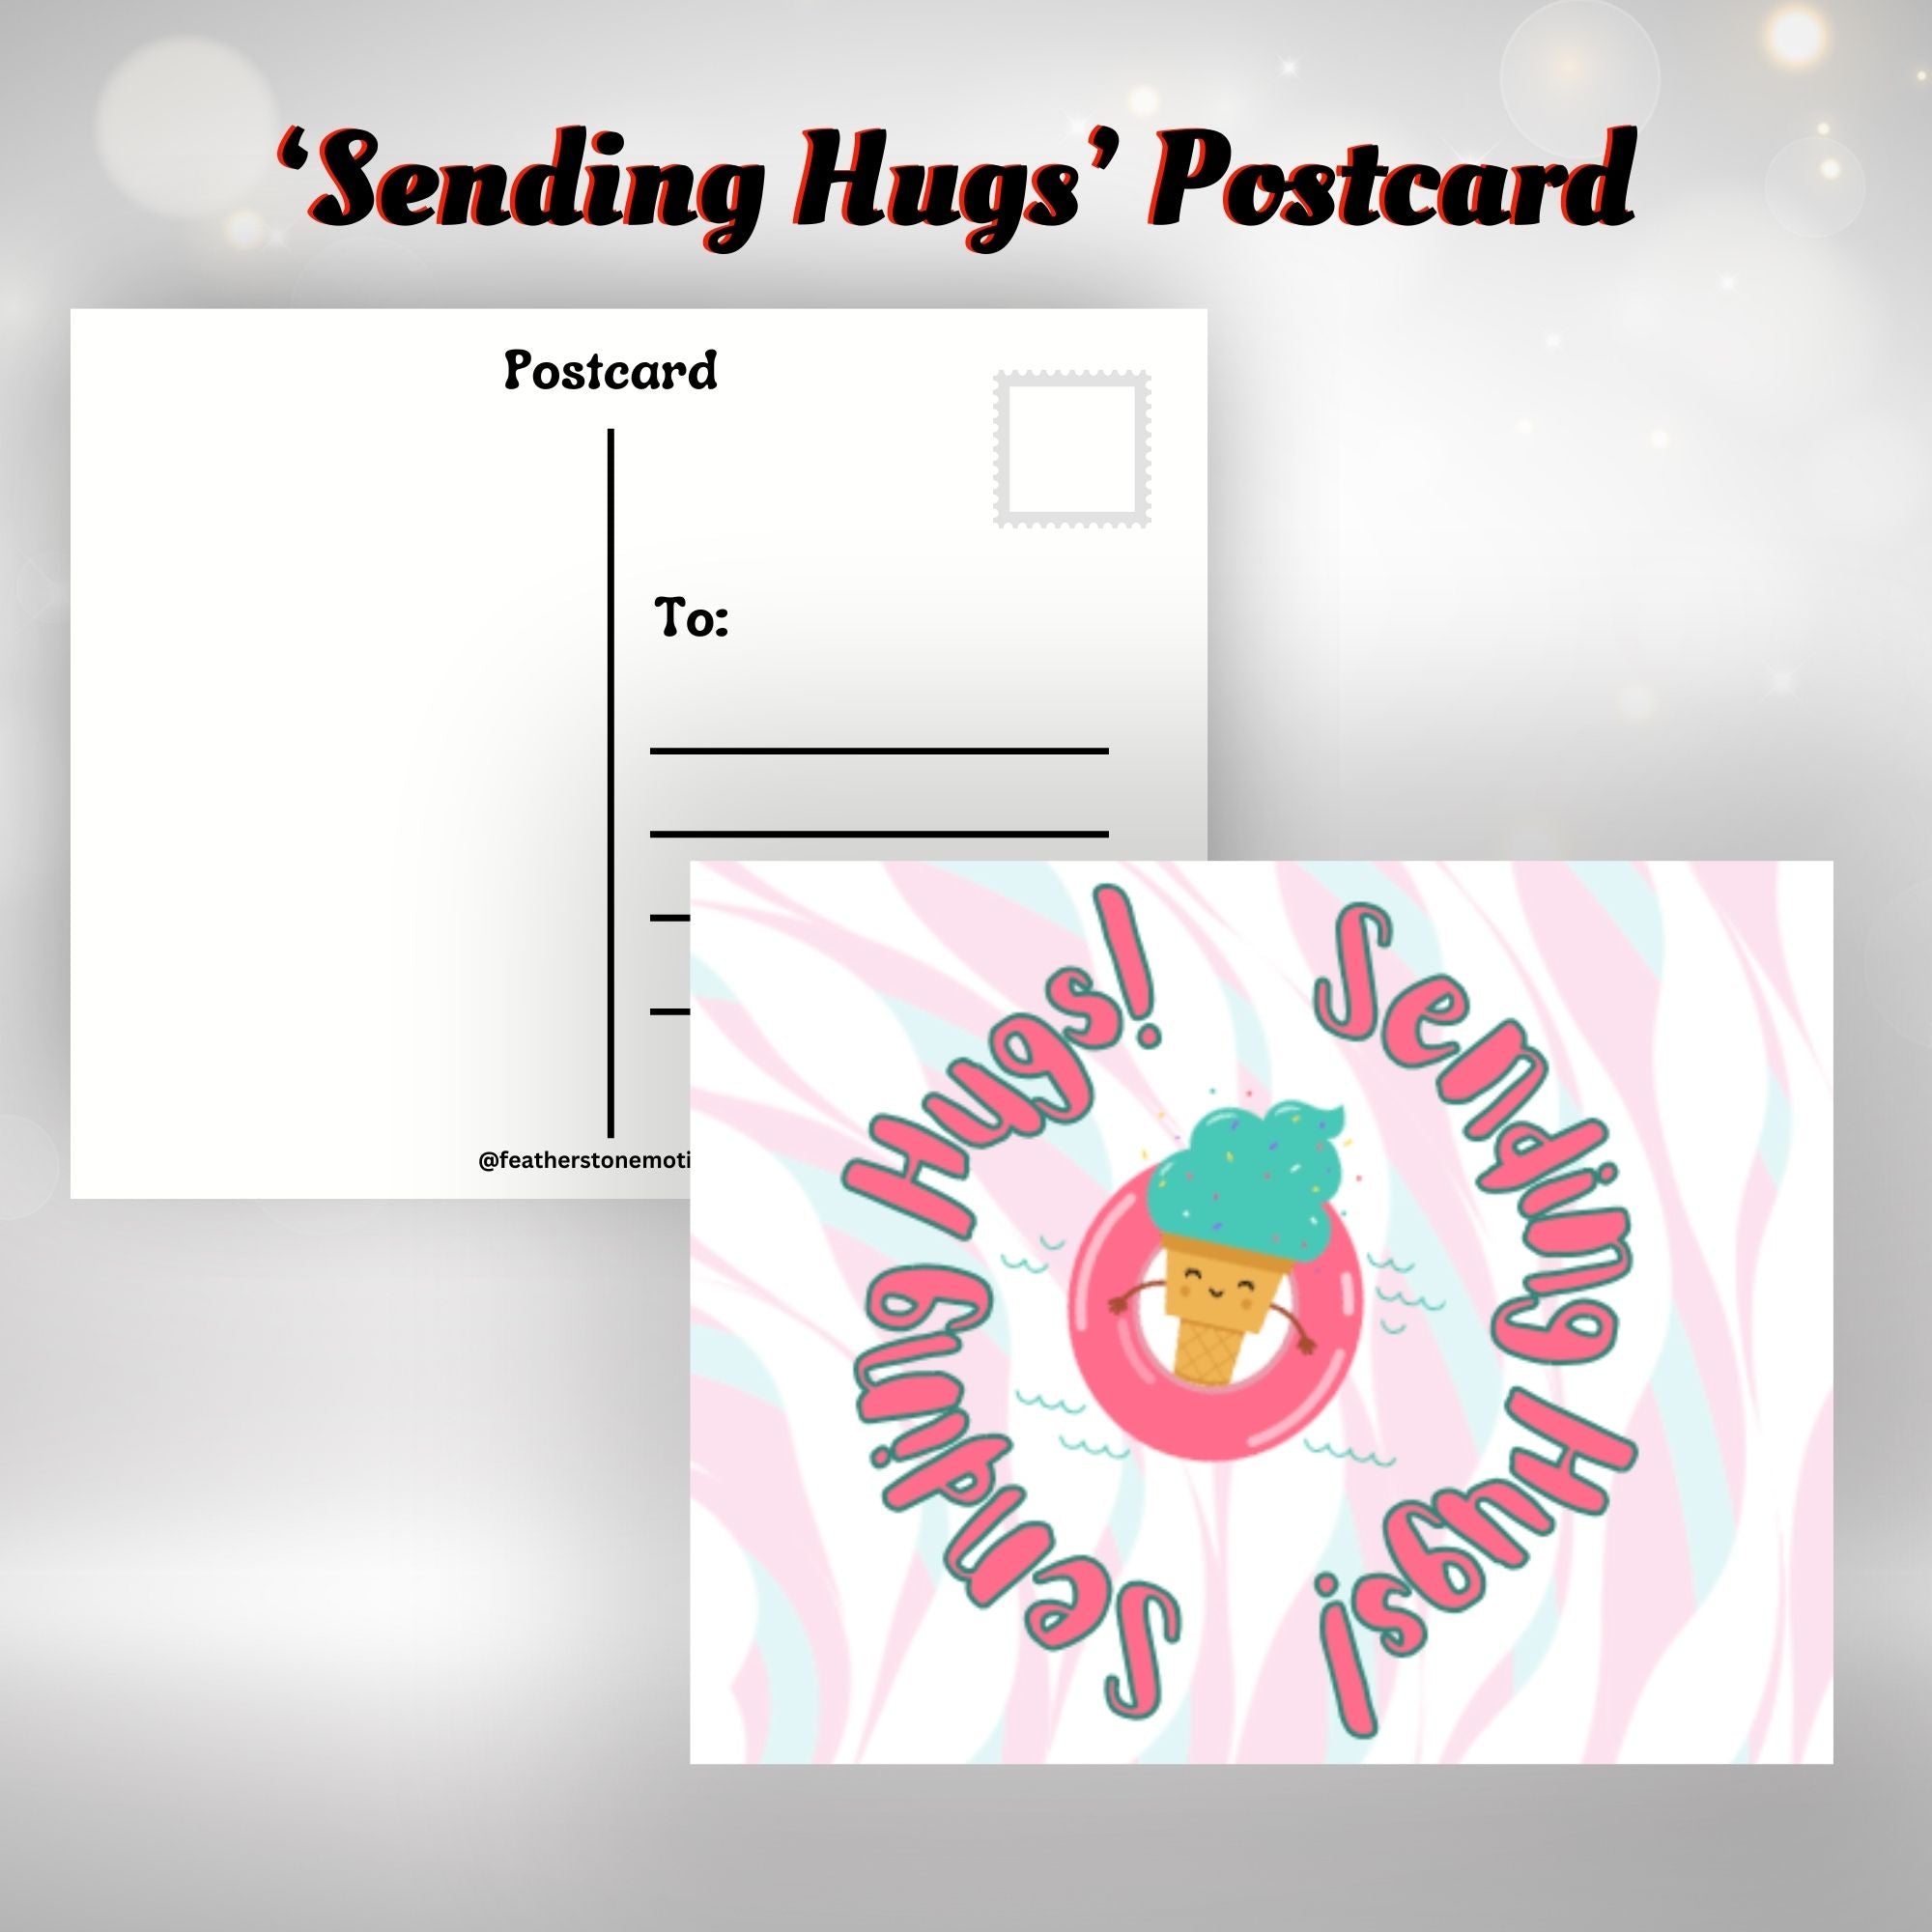 This image shows the Sending Hugs! postcard with an ice cream cone floating in an inner tube in the center of the card.